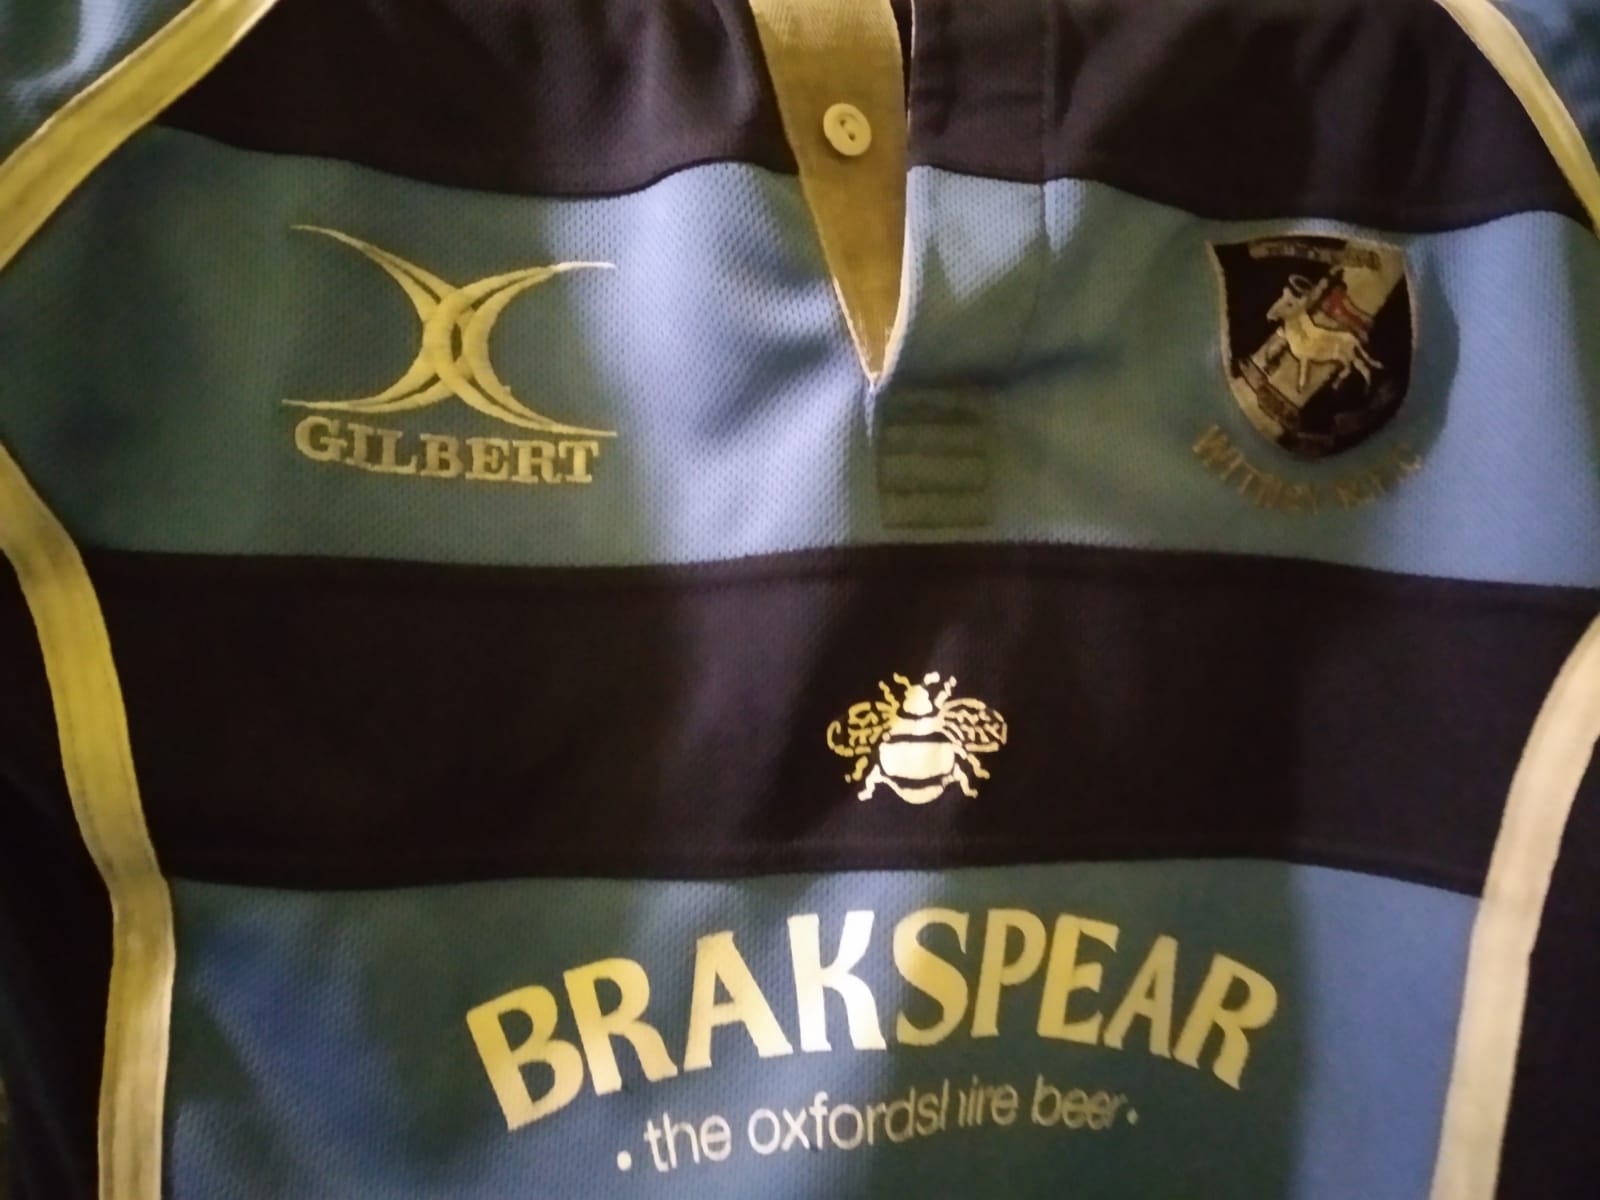 mystery rugby jersey